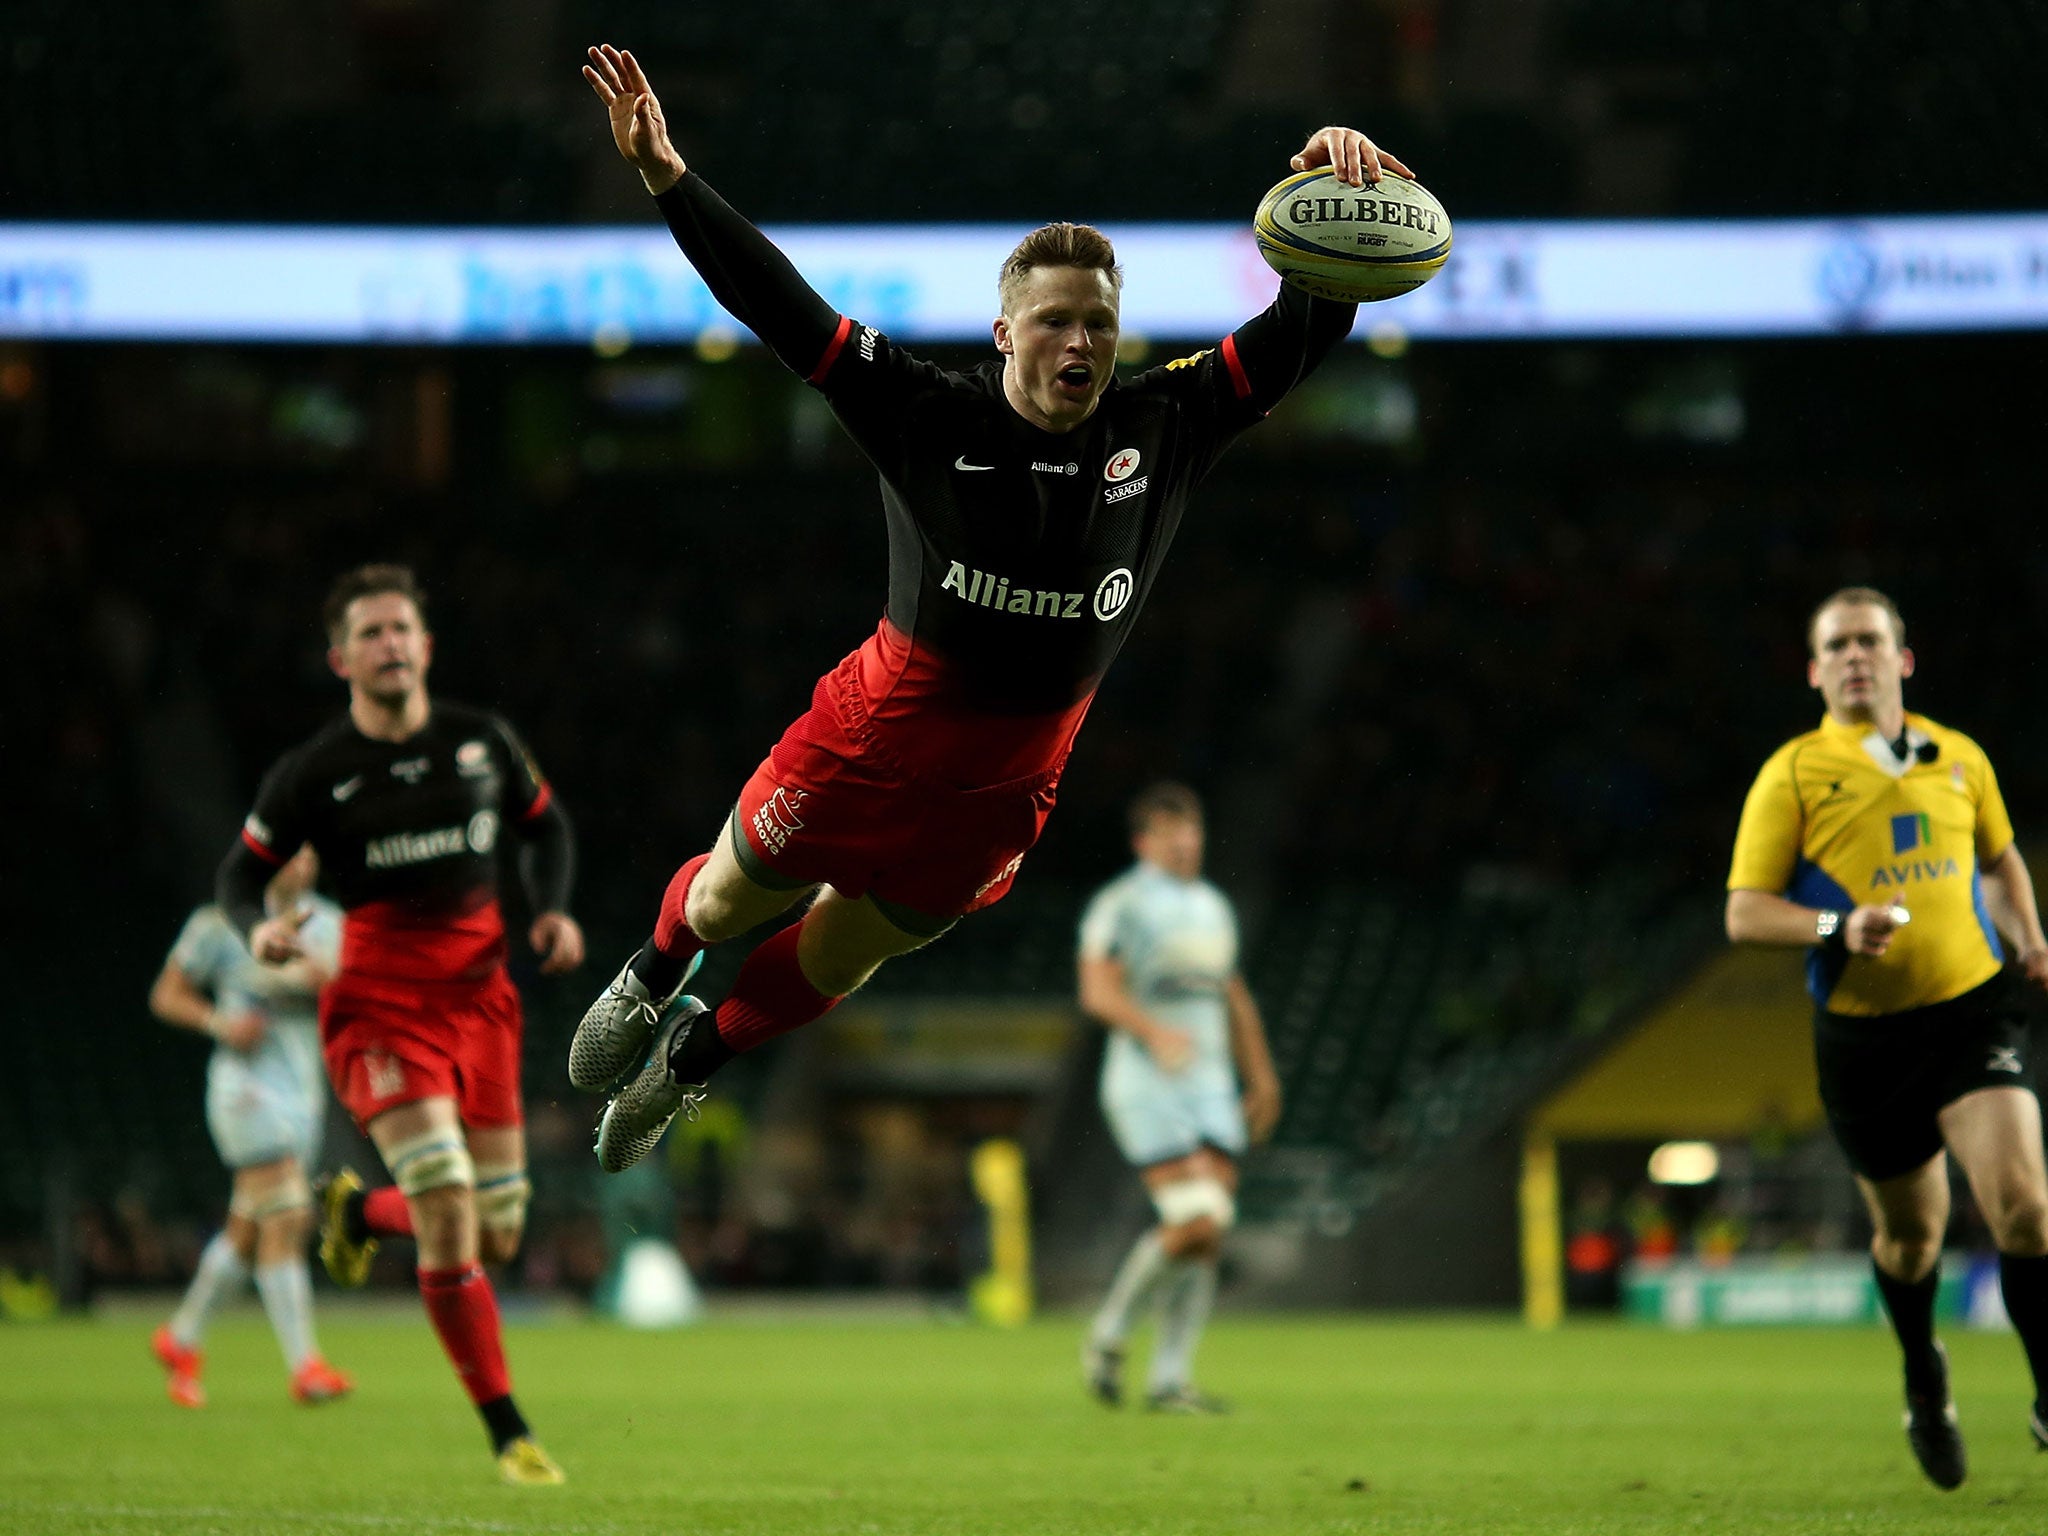 Saracens are a club £40m in debt